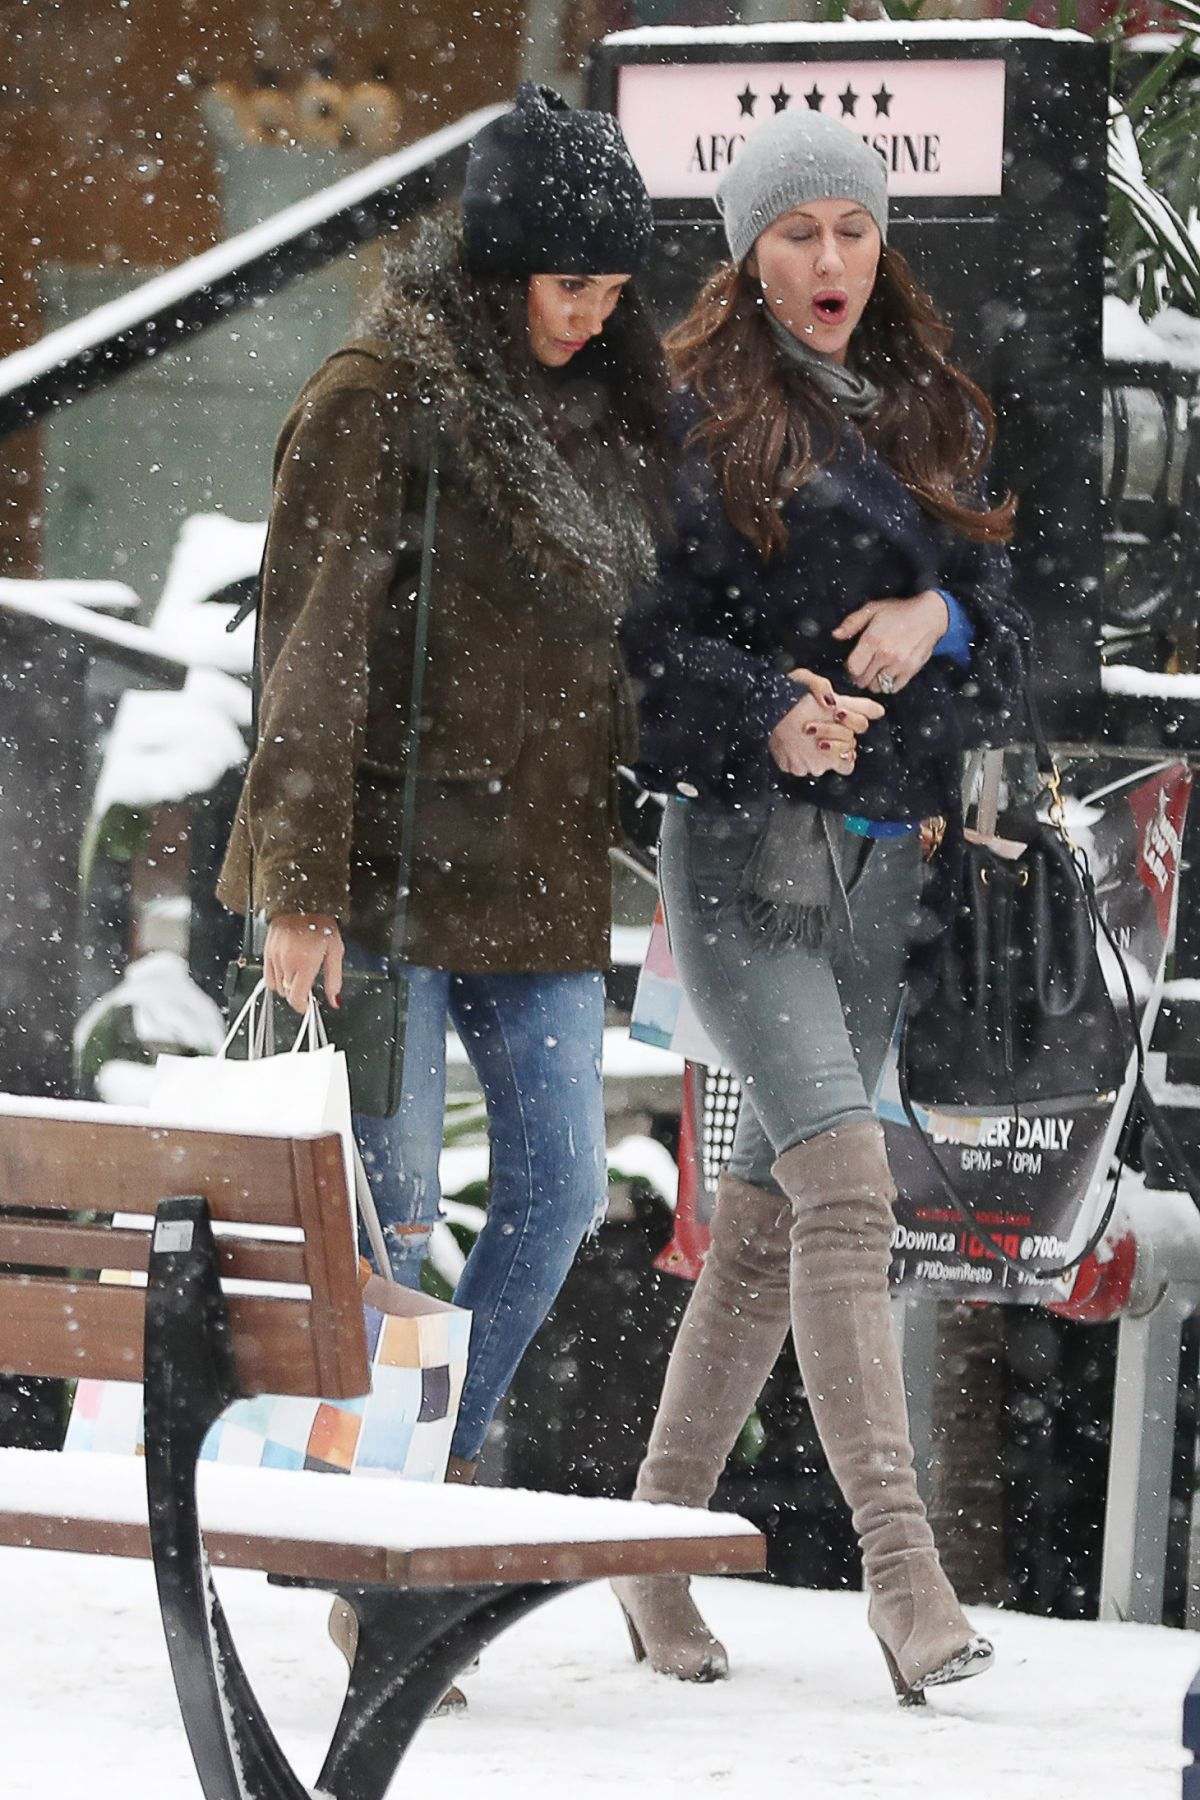 USA SUITS' Star Meghan Markle in Canada with a friend on 12.15.16